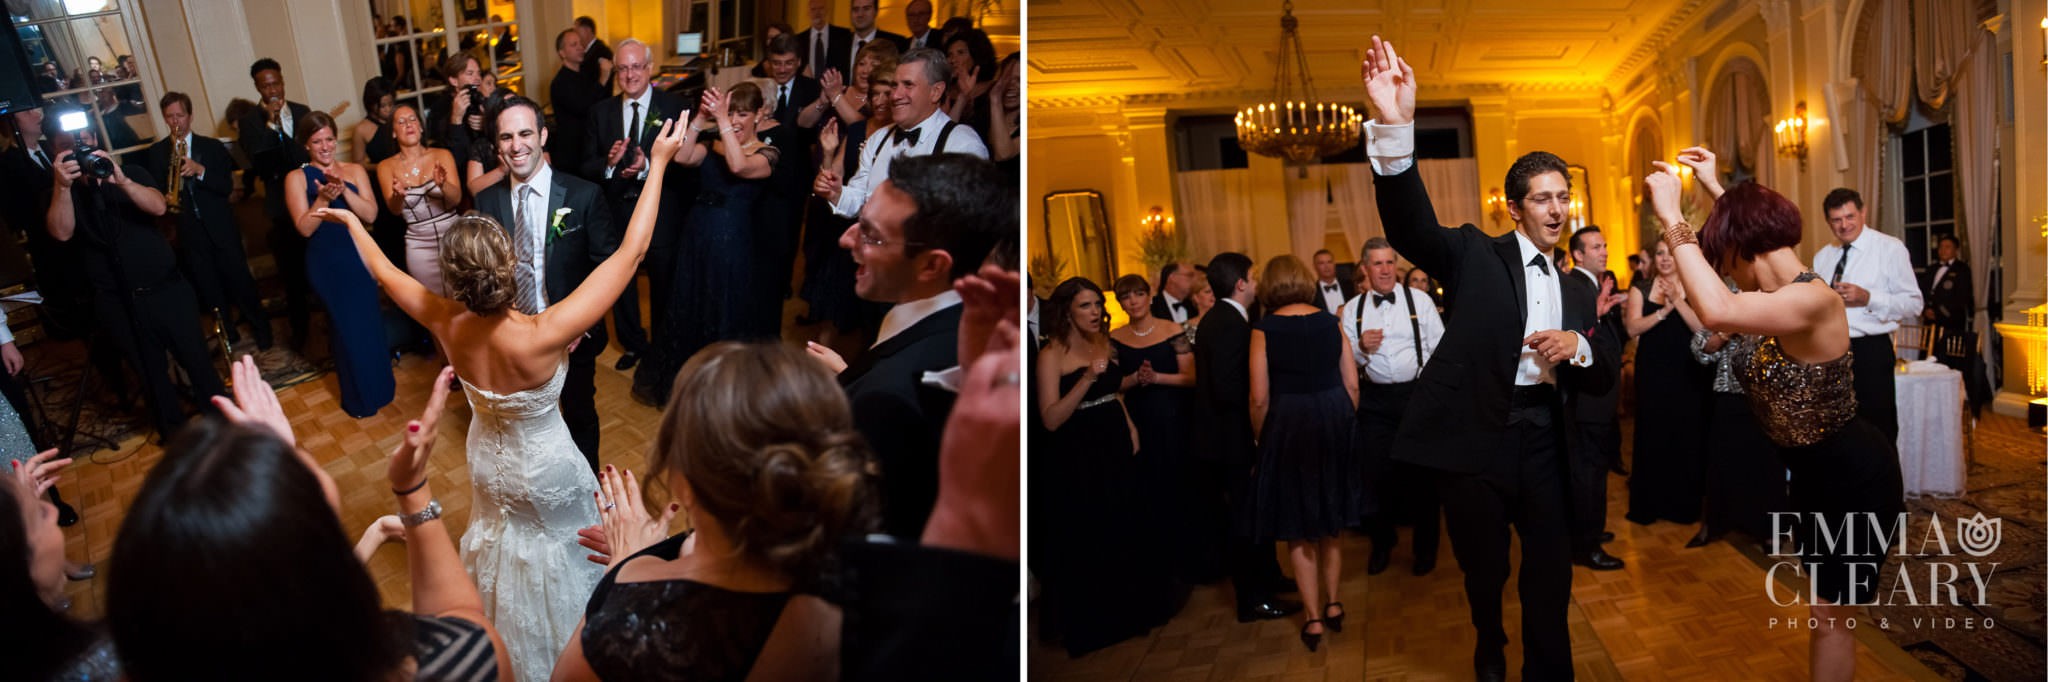 Yale Club Wedding Photos | Picturesque Rooftop Views of Manhattan